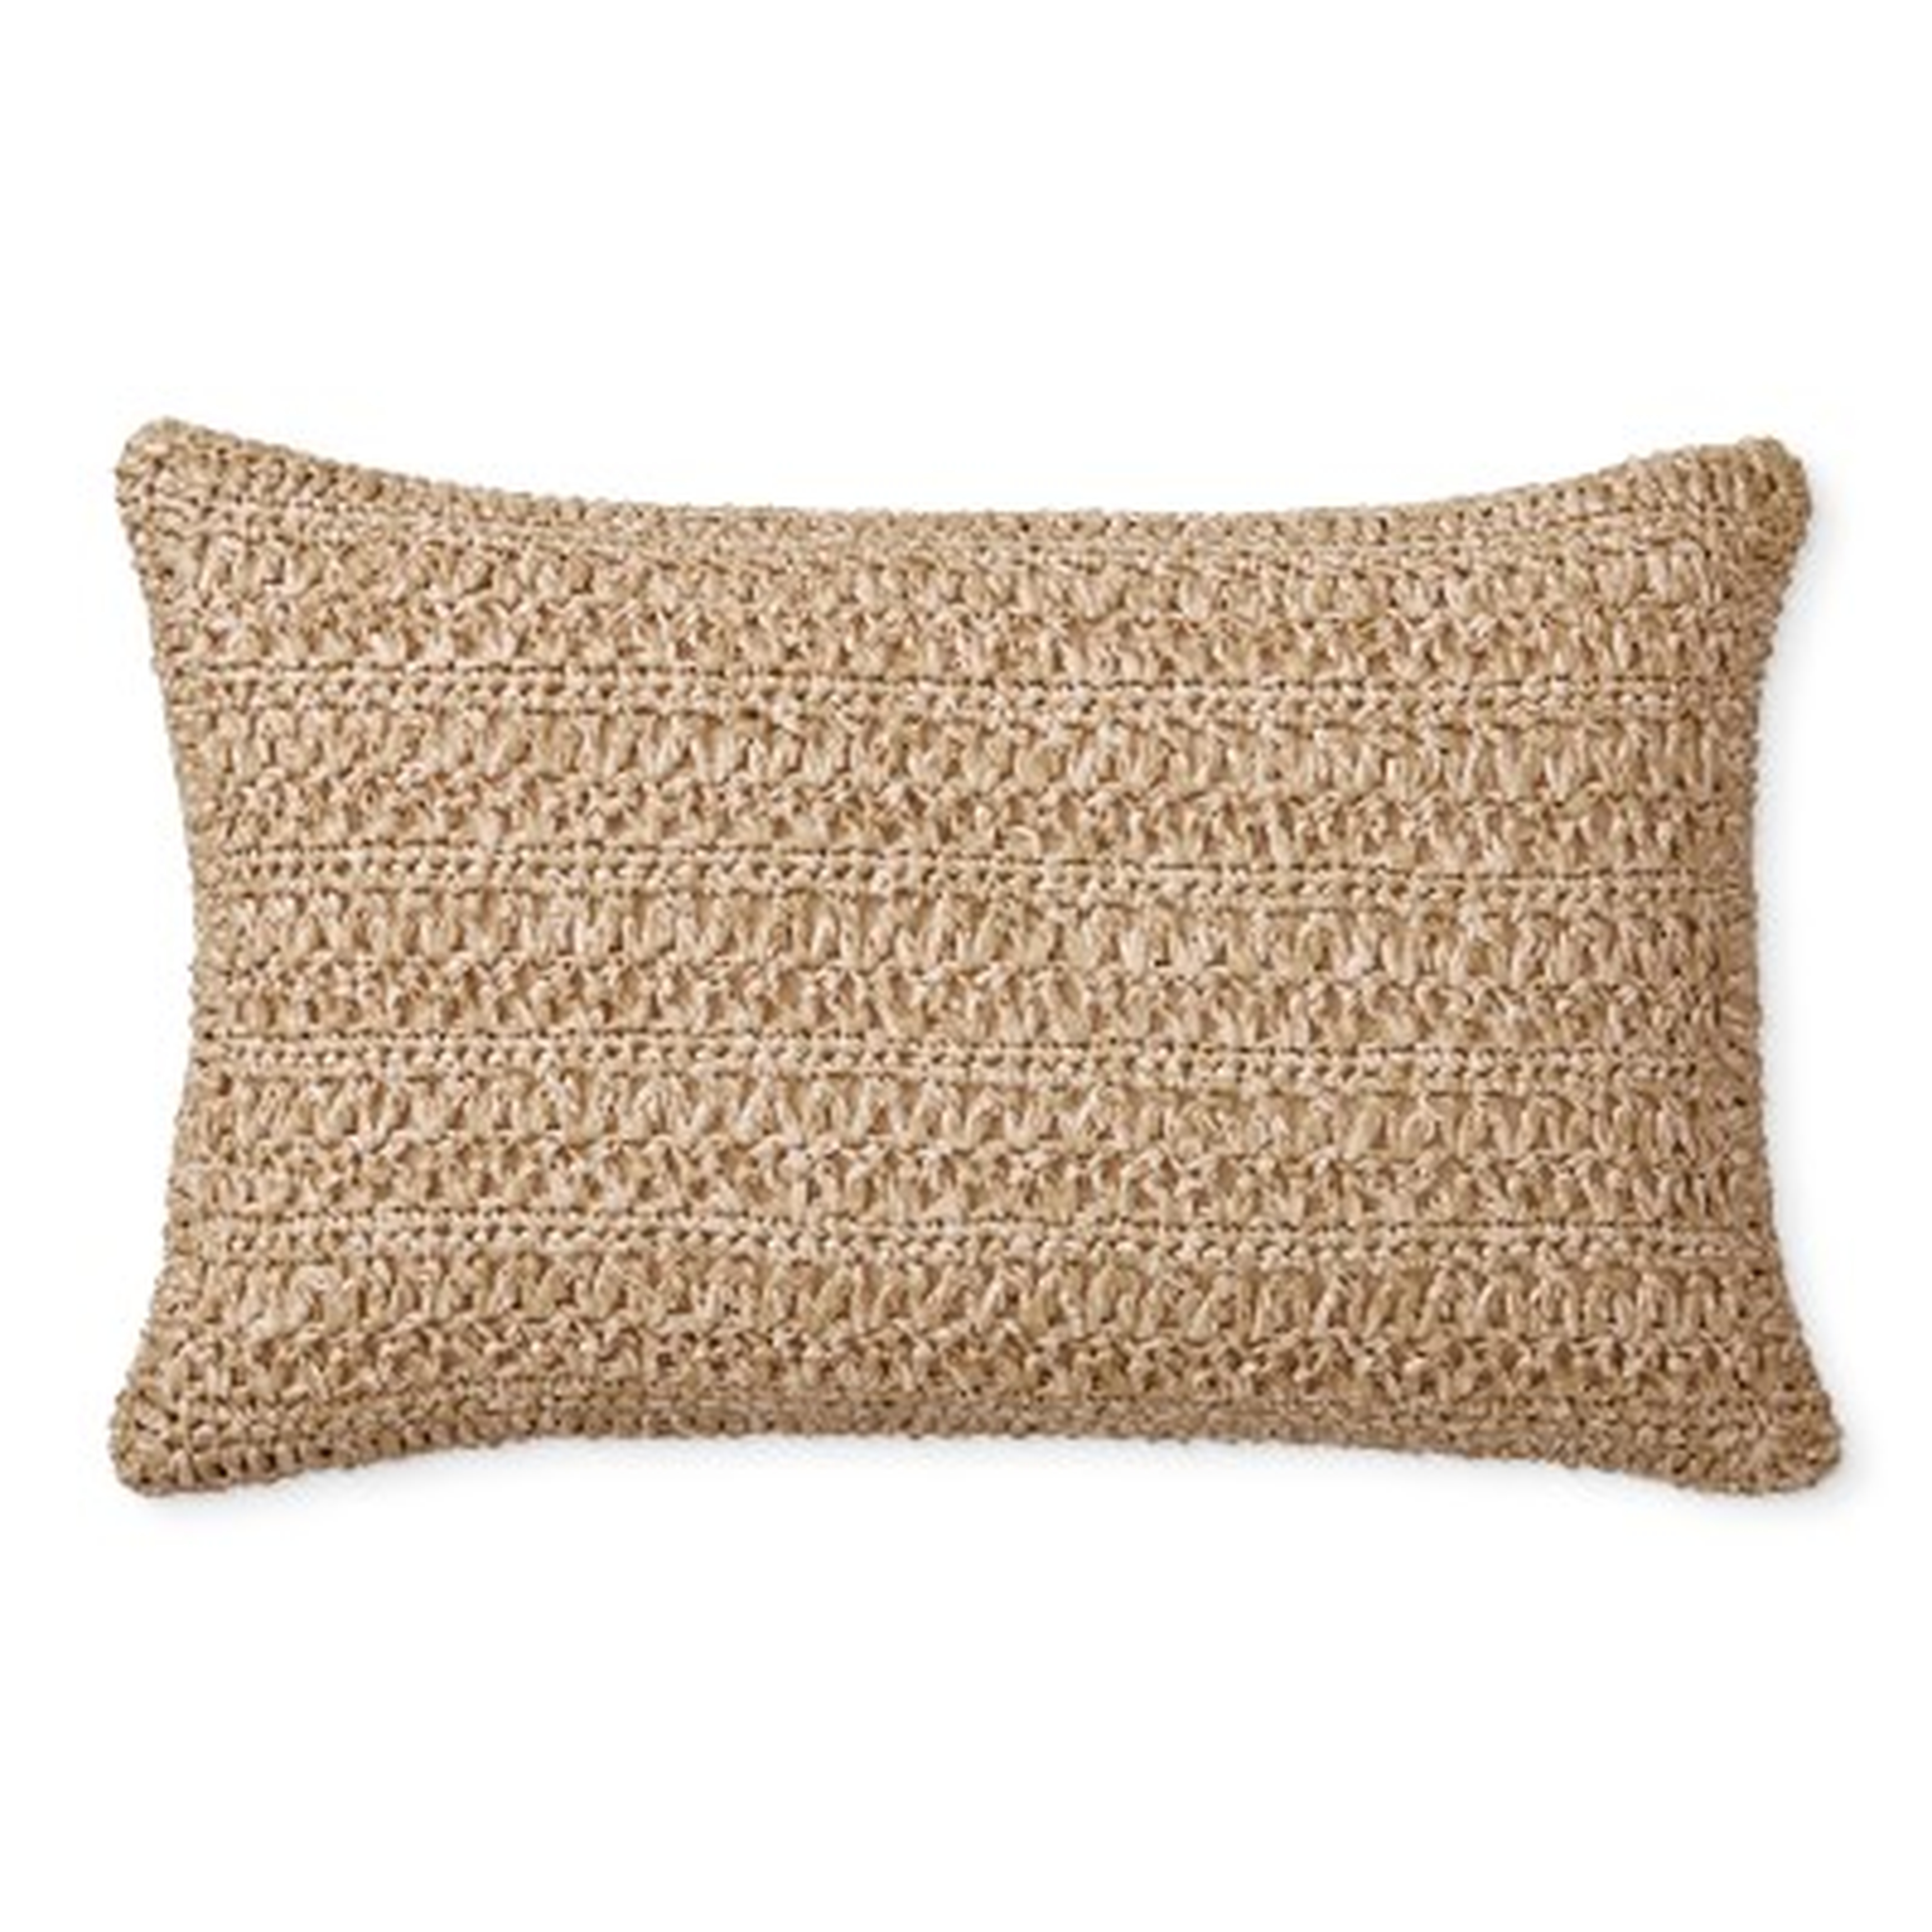 Outdoor Faux Natural Pillow Cover, 14" X 22", Natural - Williams Sonoma